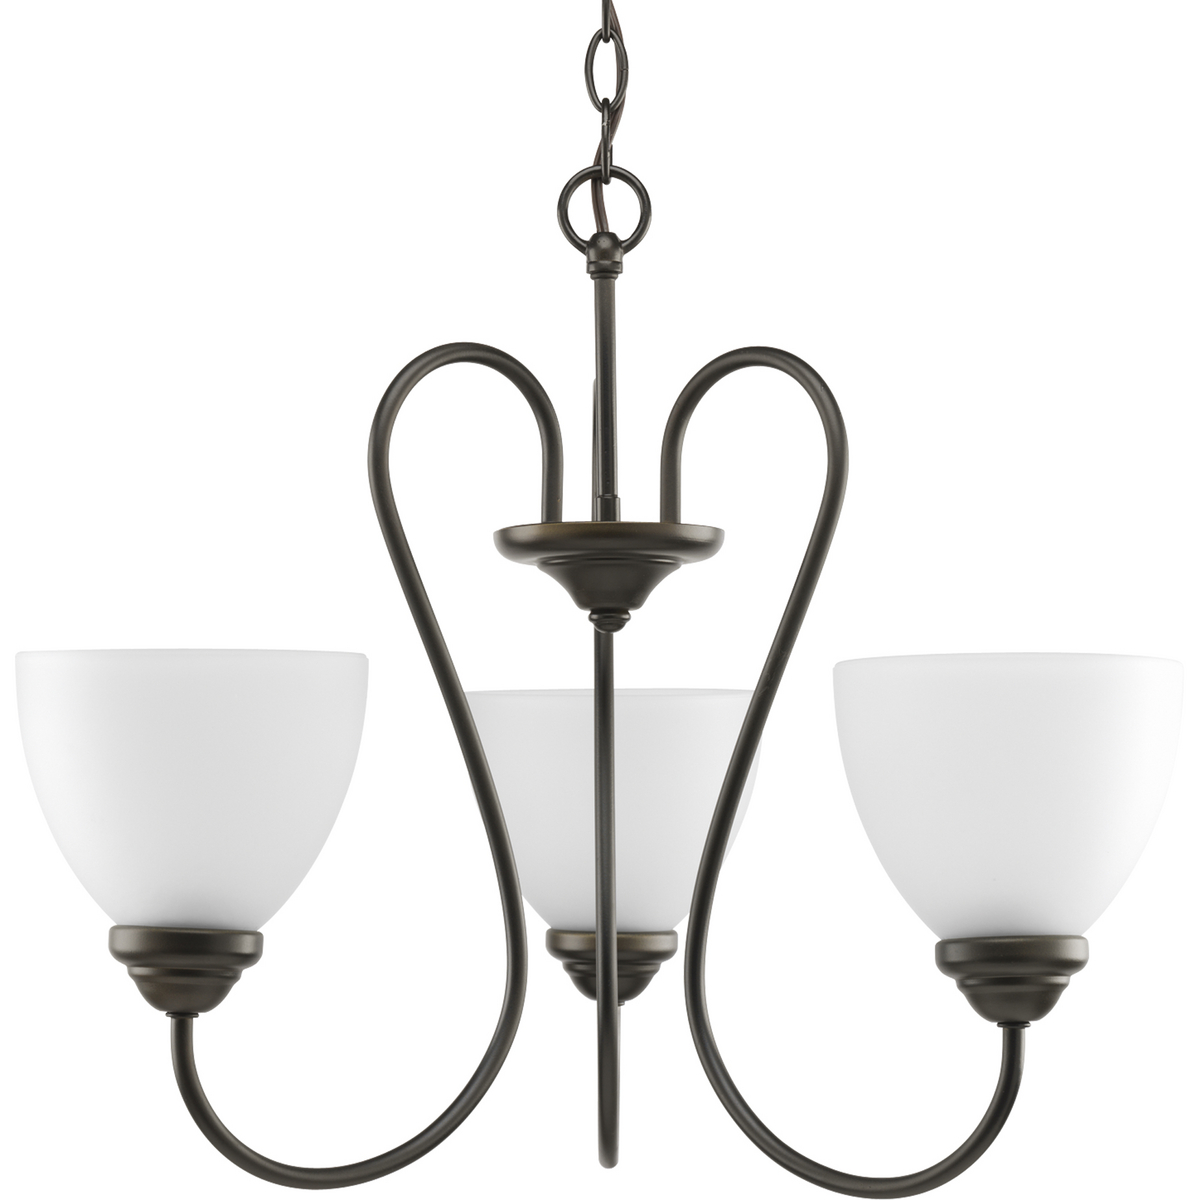 Three-light Antique Bronze chandelier with etched glass shades takes you back in time to create a pleasantly comfortable and cozy feel. The Heart Collection possesses arching forms and angles to reveal a desiring appearance. Etched glass shades have a purpose to add distinction and provide pleasing illumination to any room. 42 in of 9 gauge chain is provided to allow the fixture to hang straight and level.